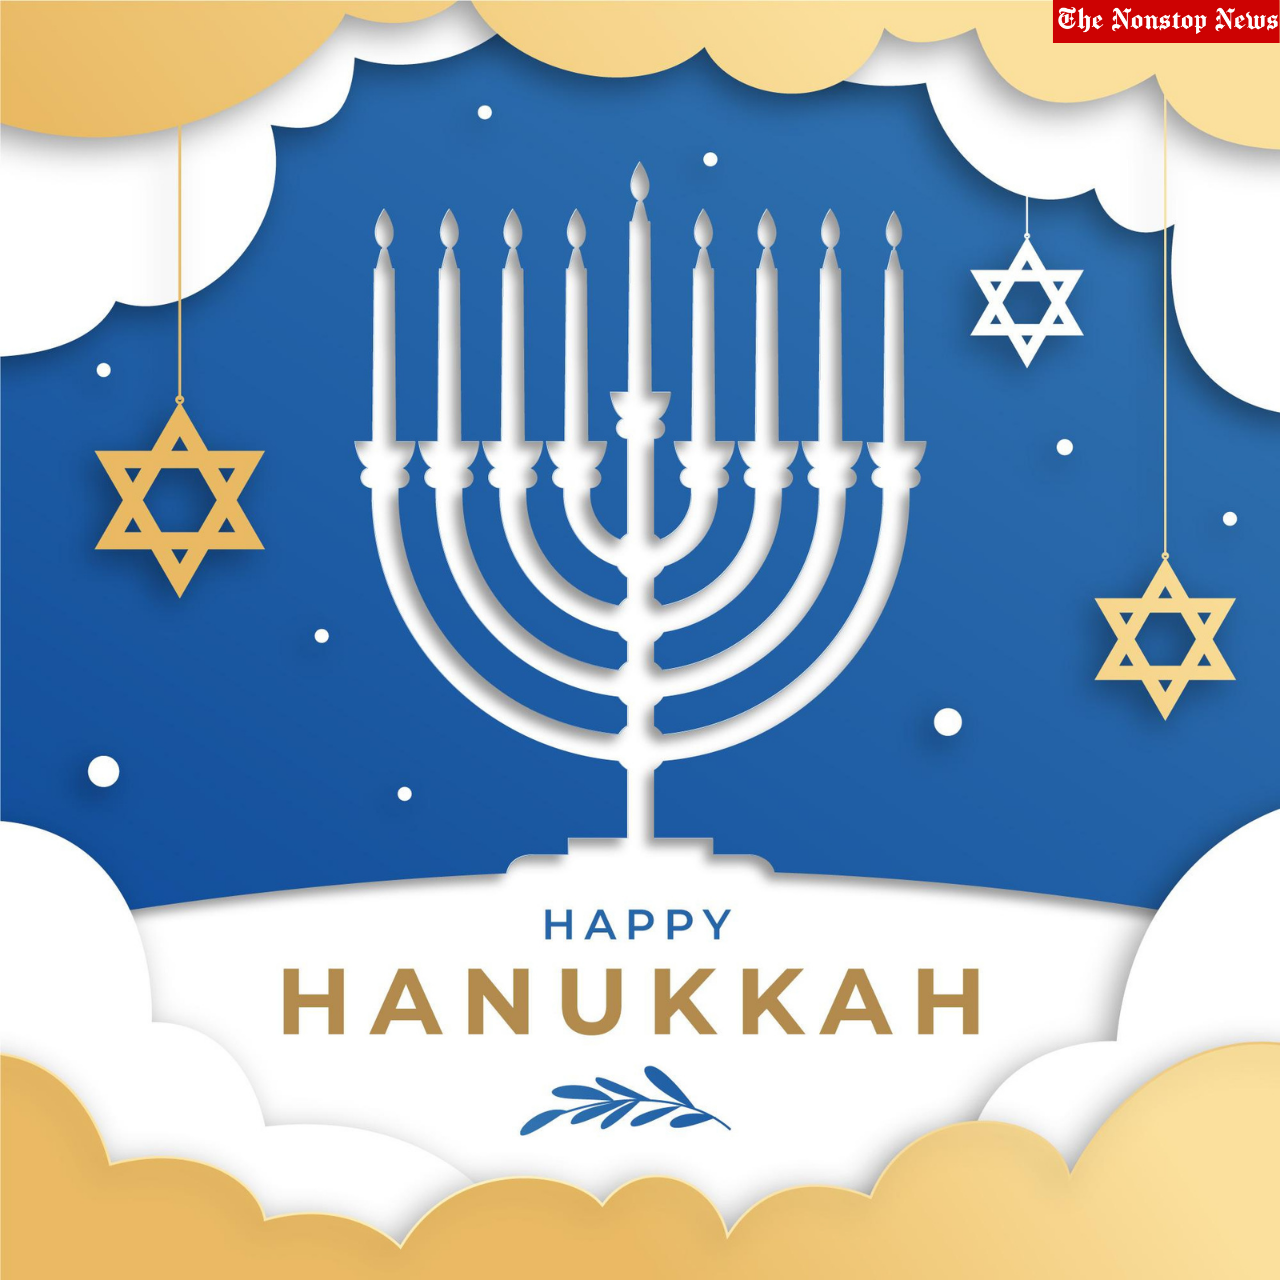 Hanukkah 2021 Wishes, Quotes, Sayings, HD Images, Messages, and Greetings to Share